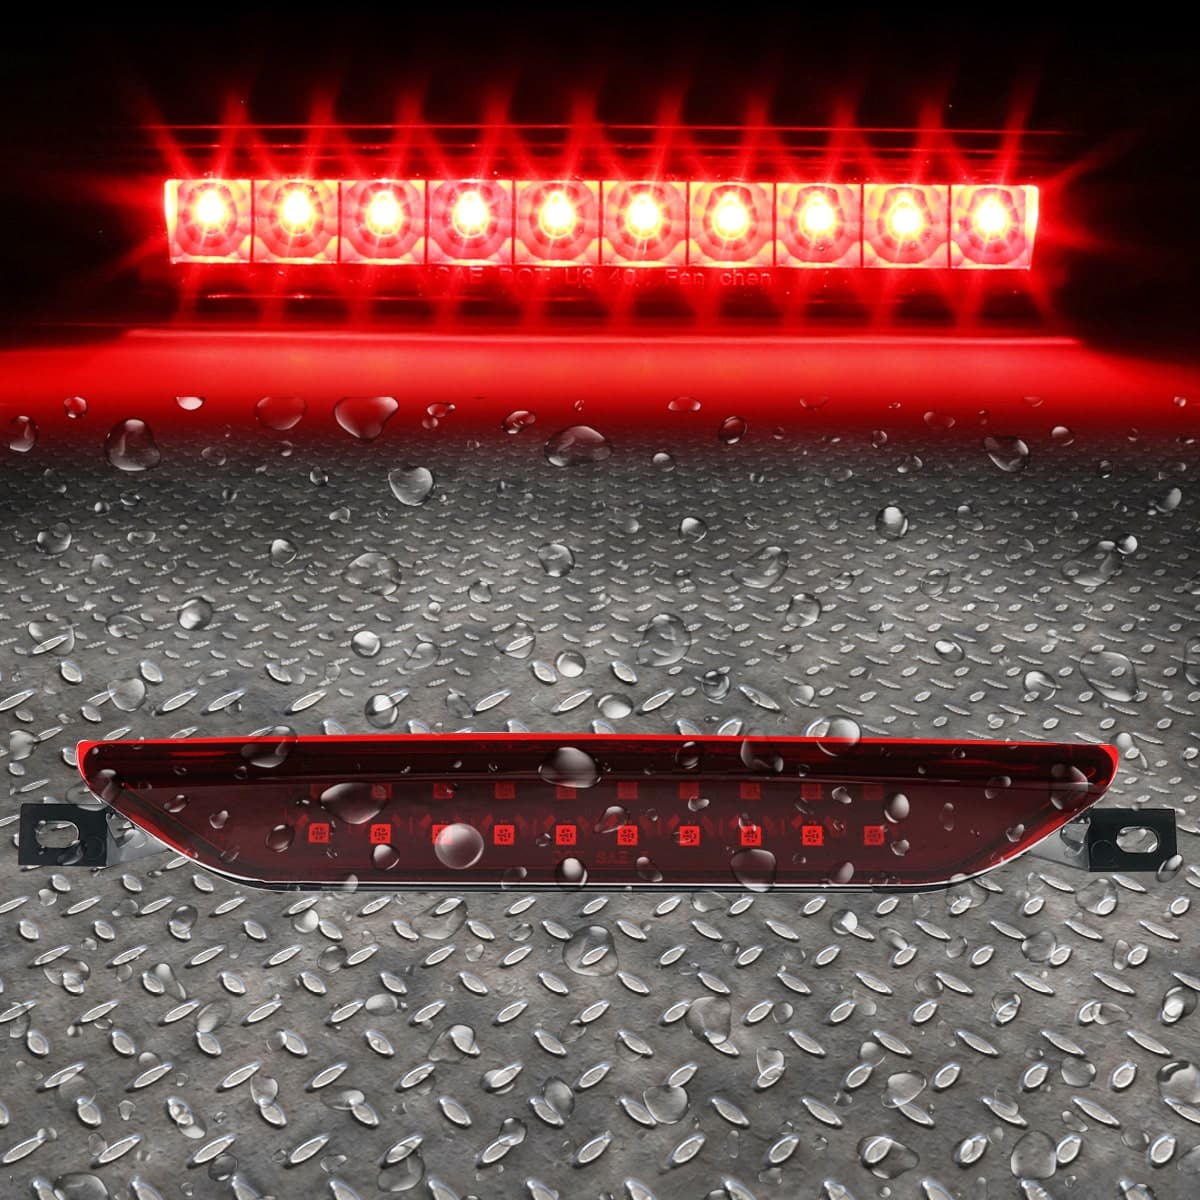 LED Third 3RD Tail Brake Stop Light Lamp 200LM For Jeep Grand Cherokee 2011-2017